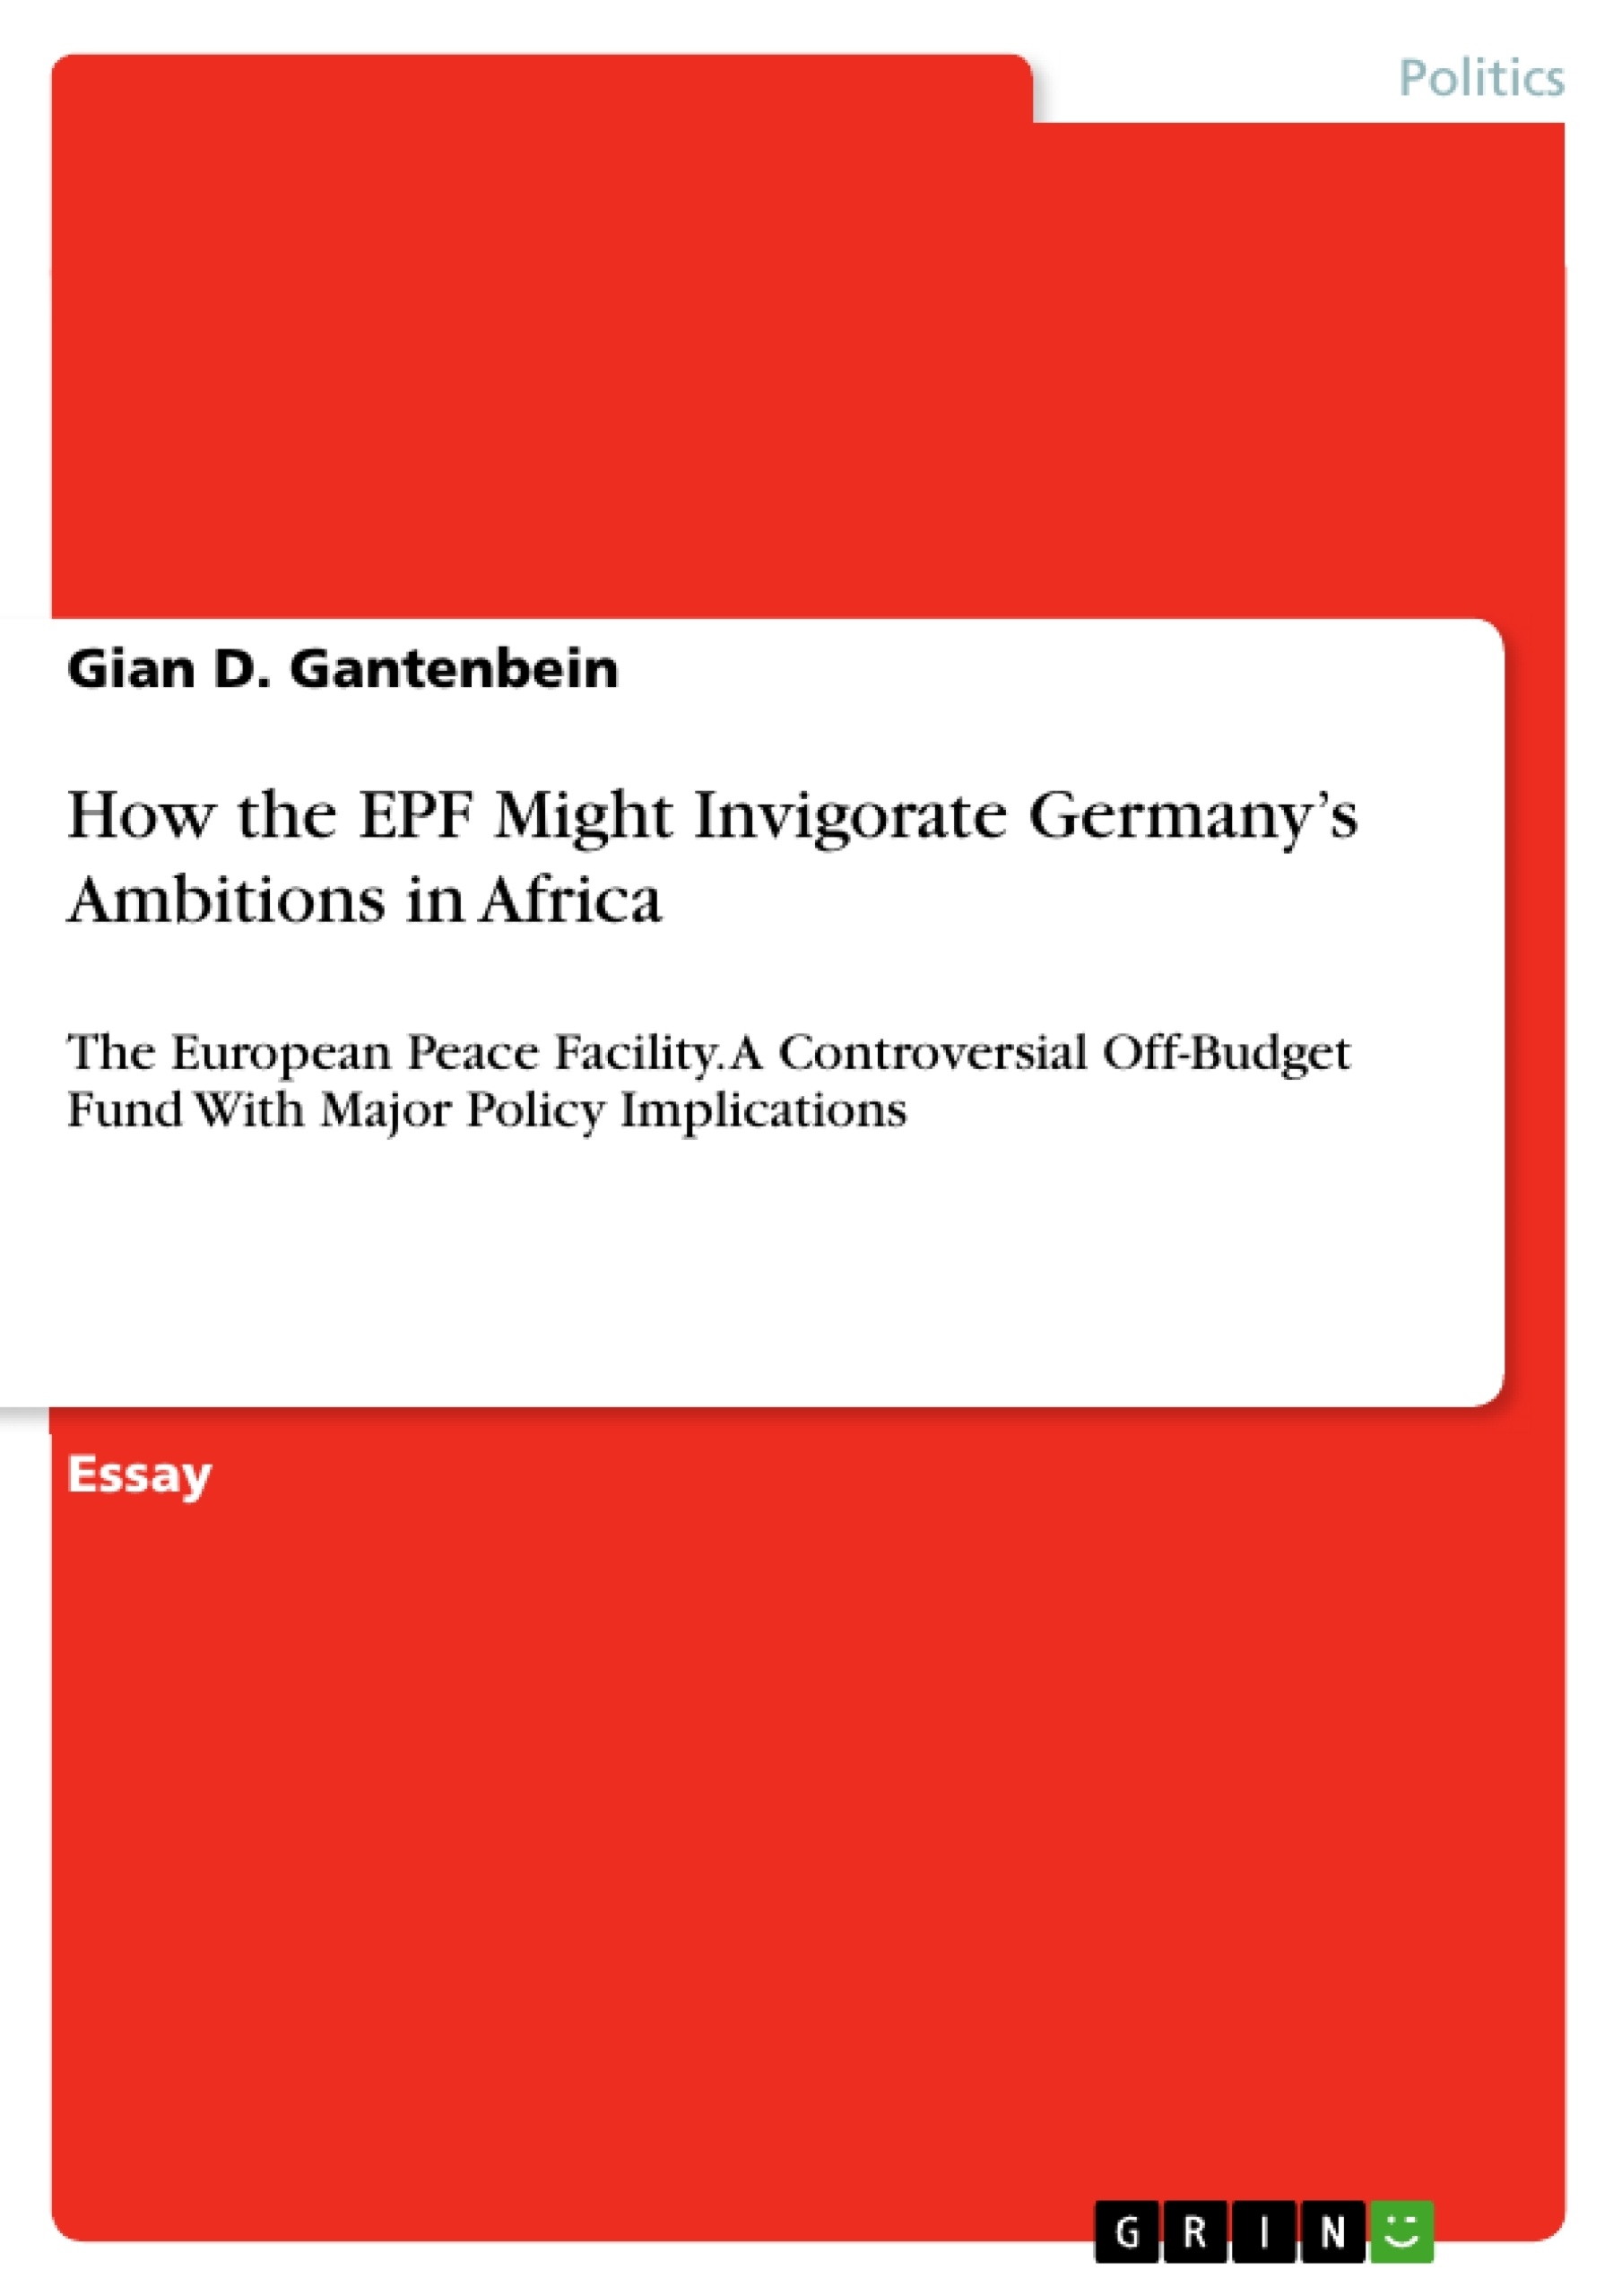 Title: How the EPF Might Invigorate Germany’s Ambitions in Africa